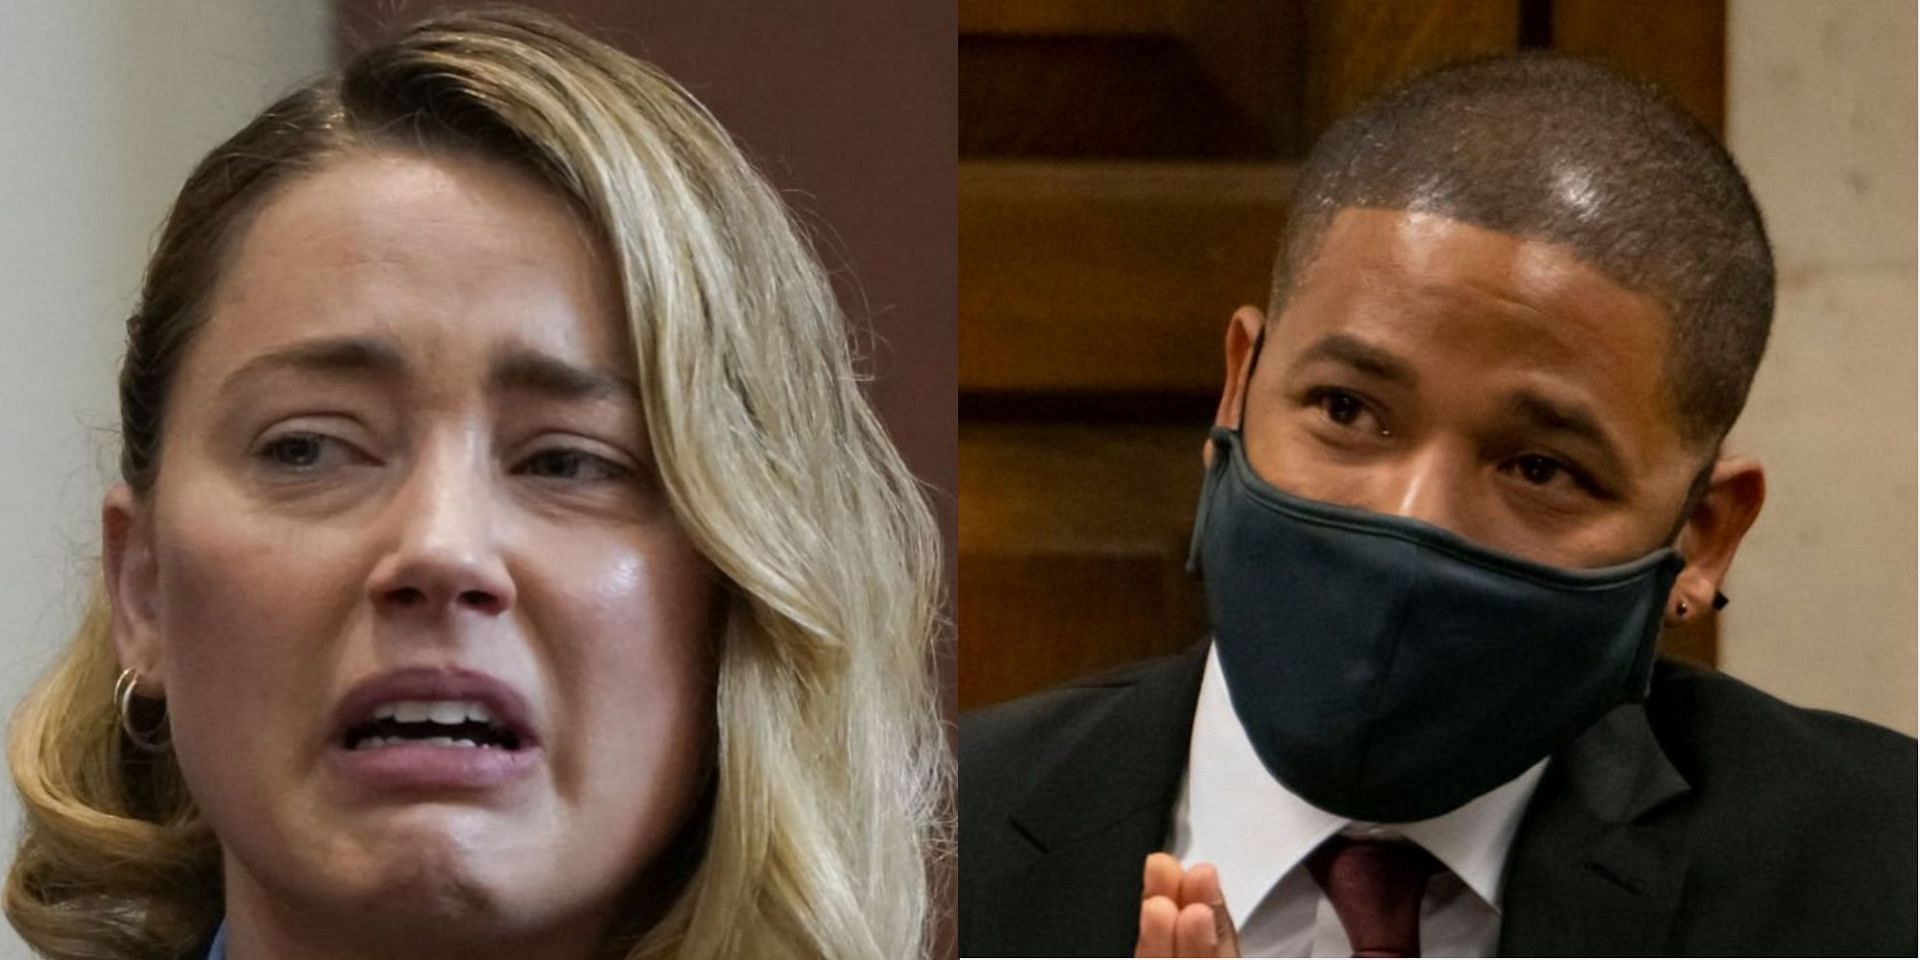 Netizens mentioned that Jussie Smollett and Amber Heard are &quot;alike&quot; with their actions (Image via Getty Images)